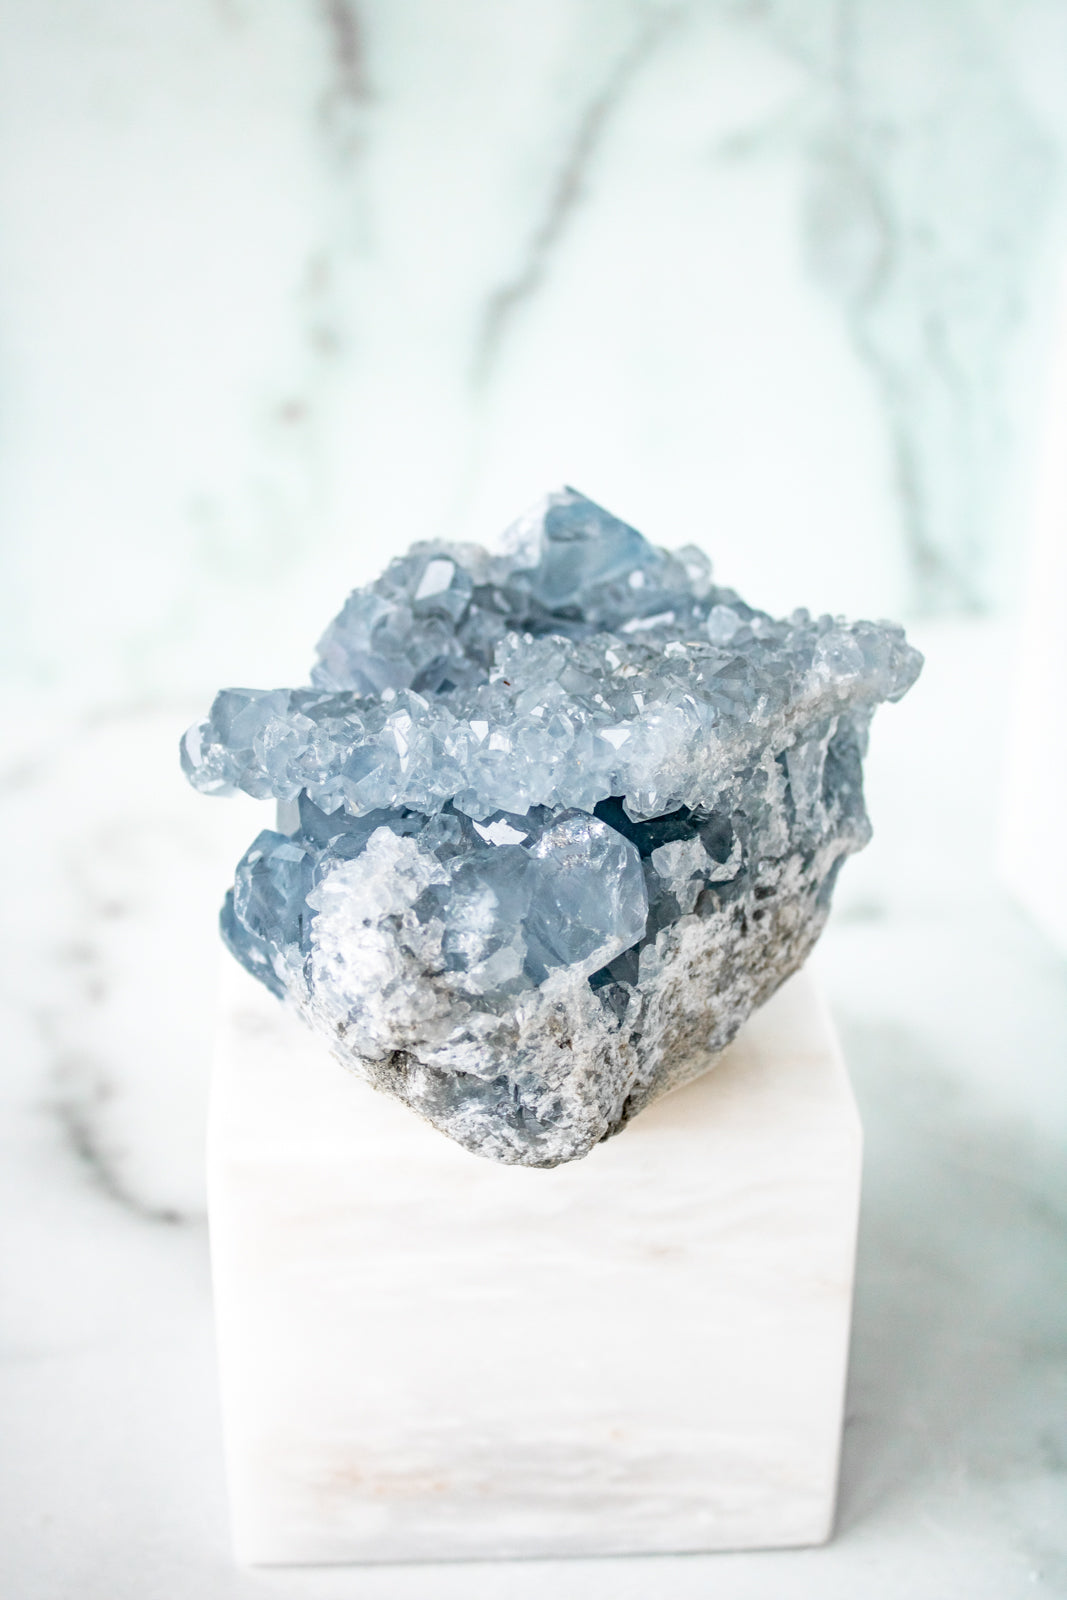 Load image into Gallery viewer, Celestite Large Cluster
